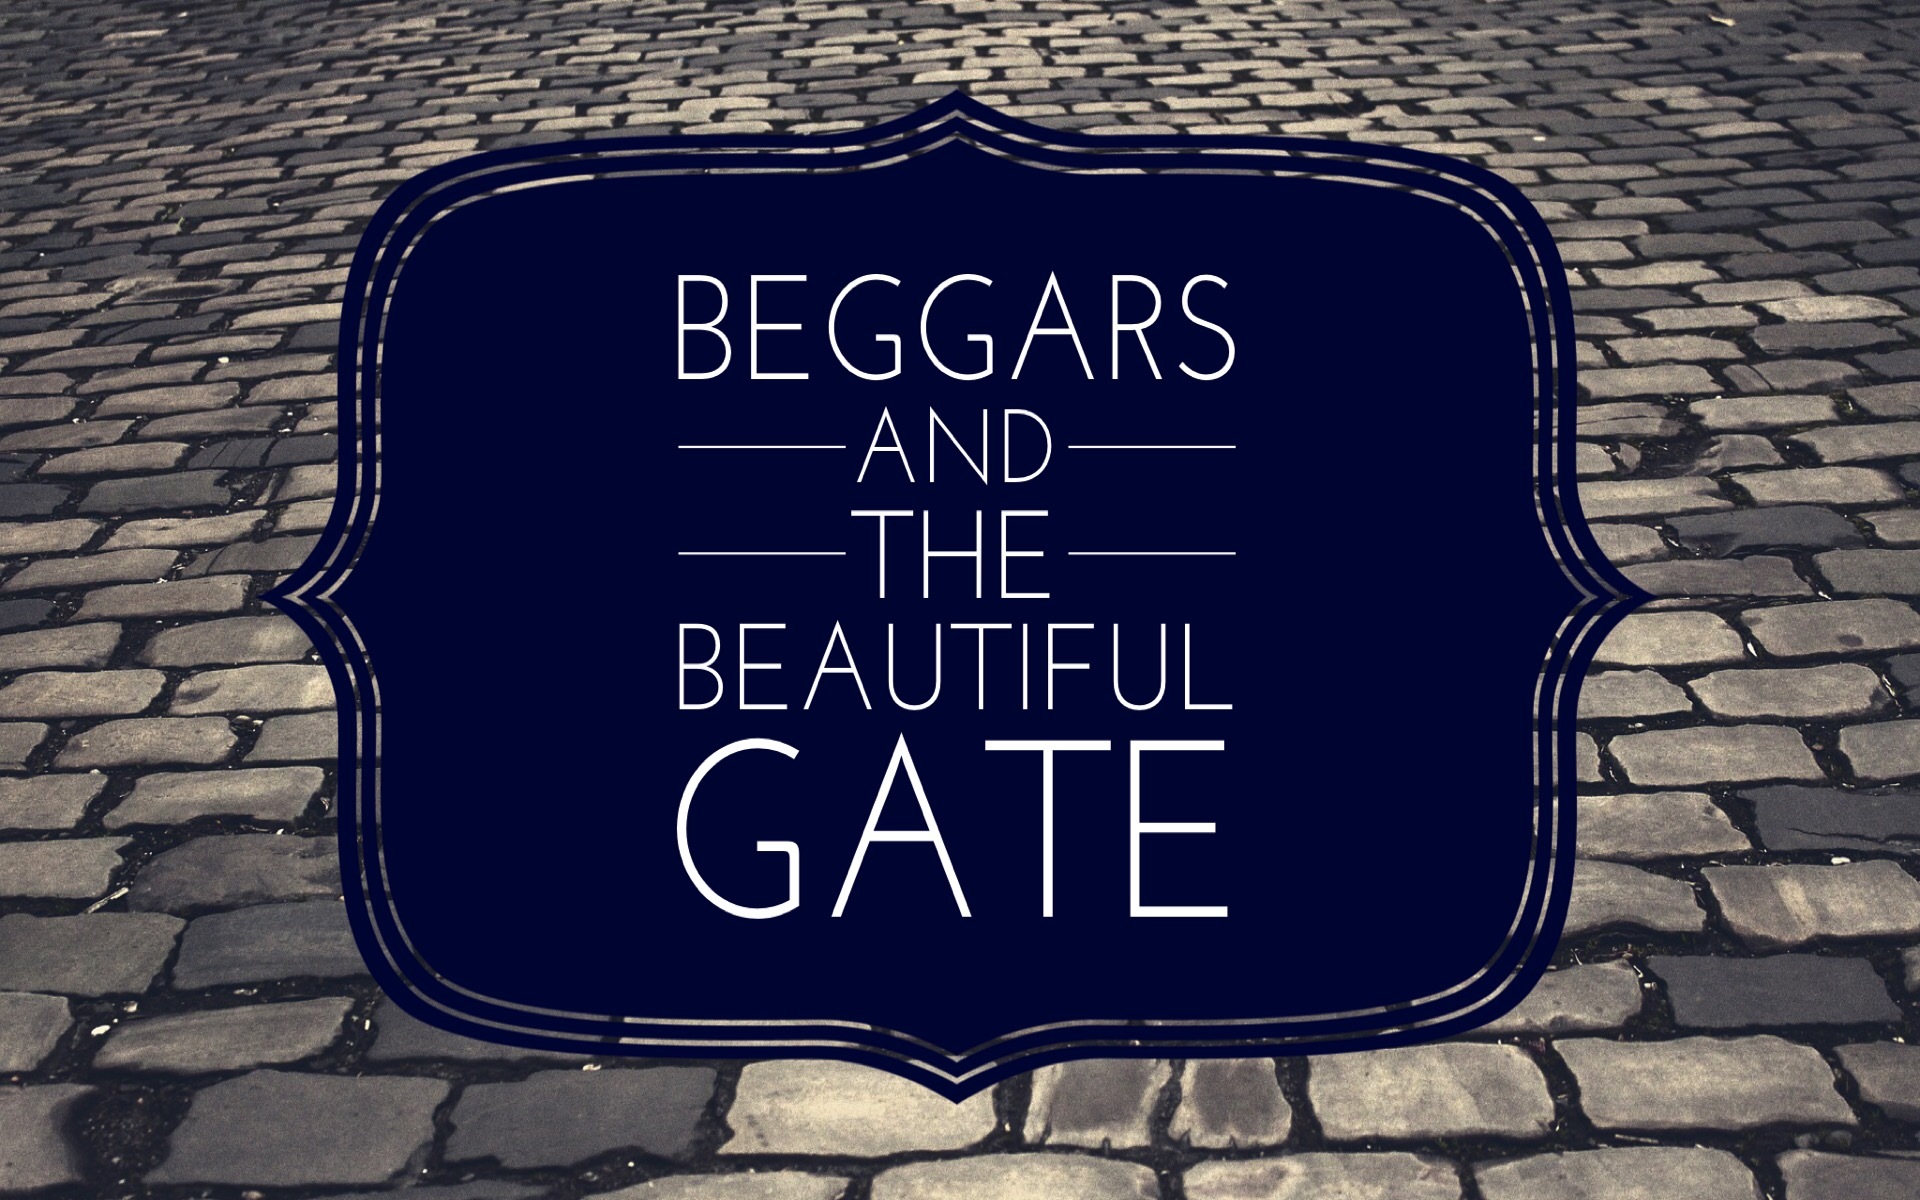 Beggars and the Beautiful Gate